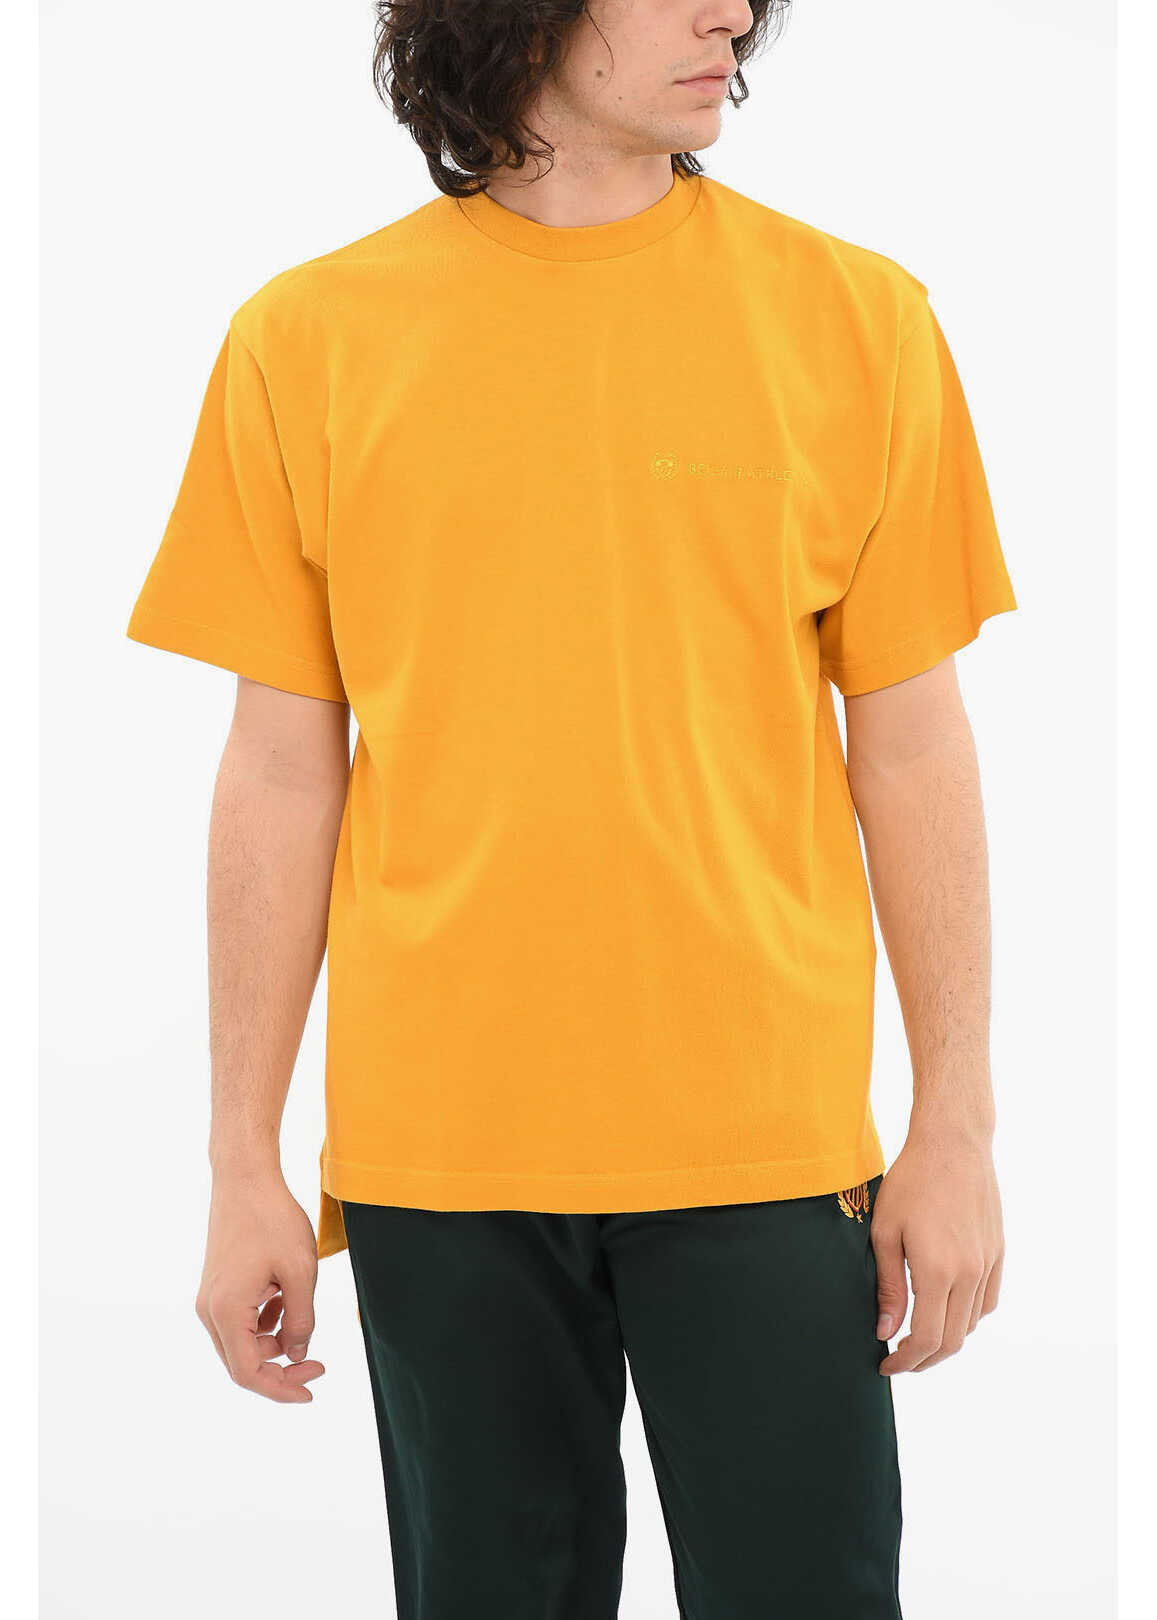 Bel-Air Athletics Academy T-Shirt With Ton-Sur-Ton Embroidered Logo Yellow